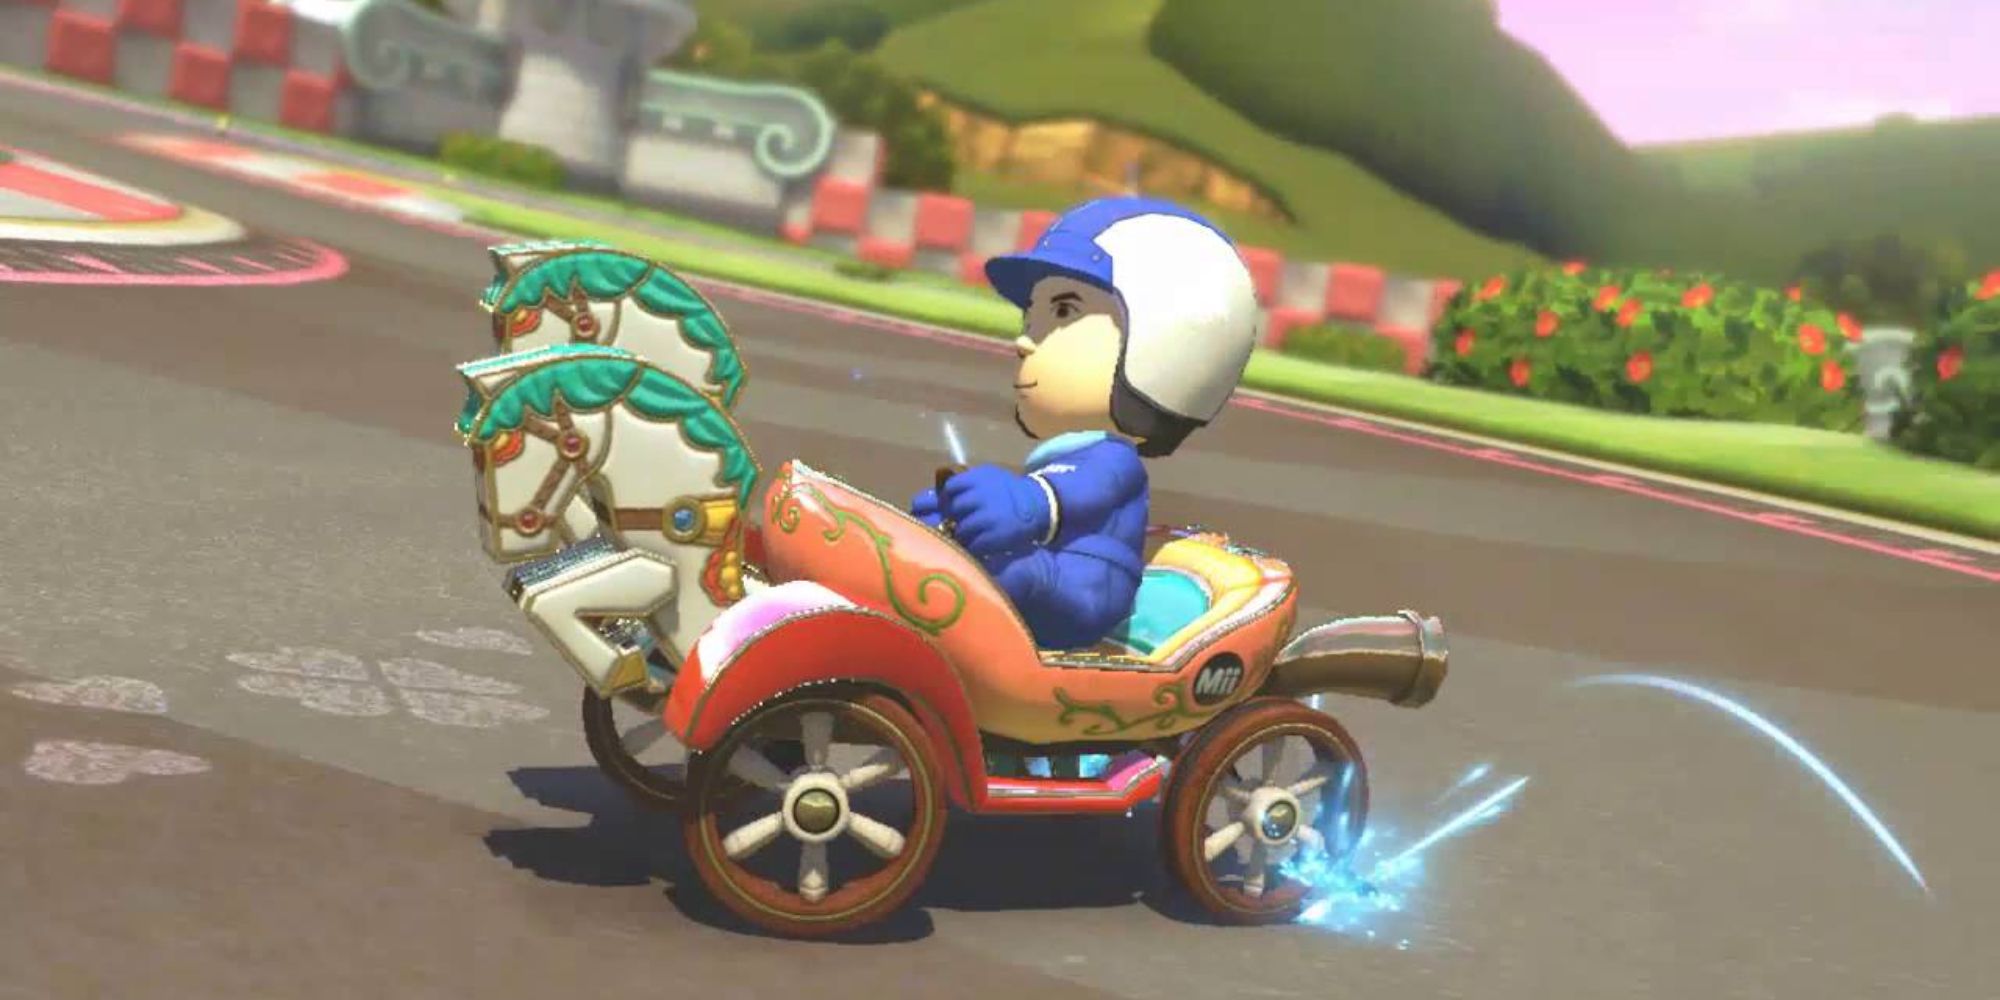 Mario Kart Vehicle Designs Mii racer skidding in Prancer along a racetrack with flowers and grass in the background